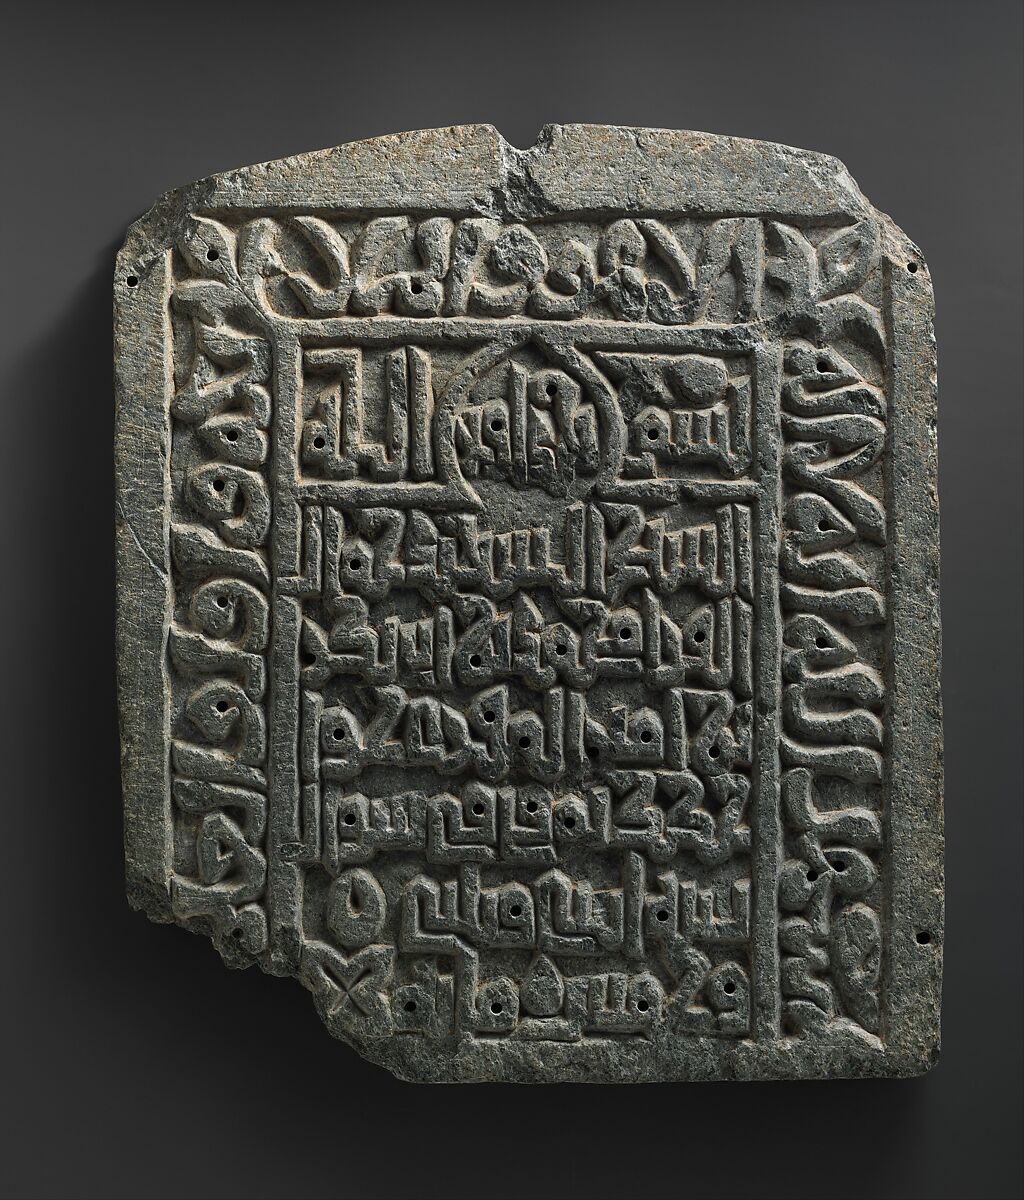 Gravestone of Muhammad ibn Abi Bakr, died Shawwal 532 A.H. [June/July 1138 A.D.], Steatite; carved 